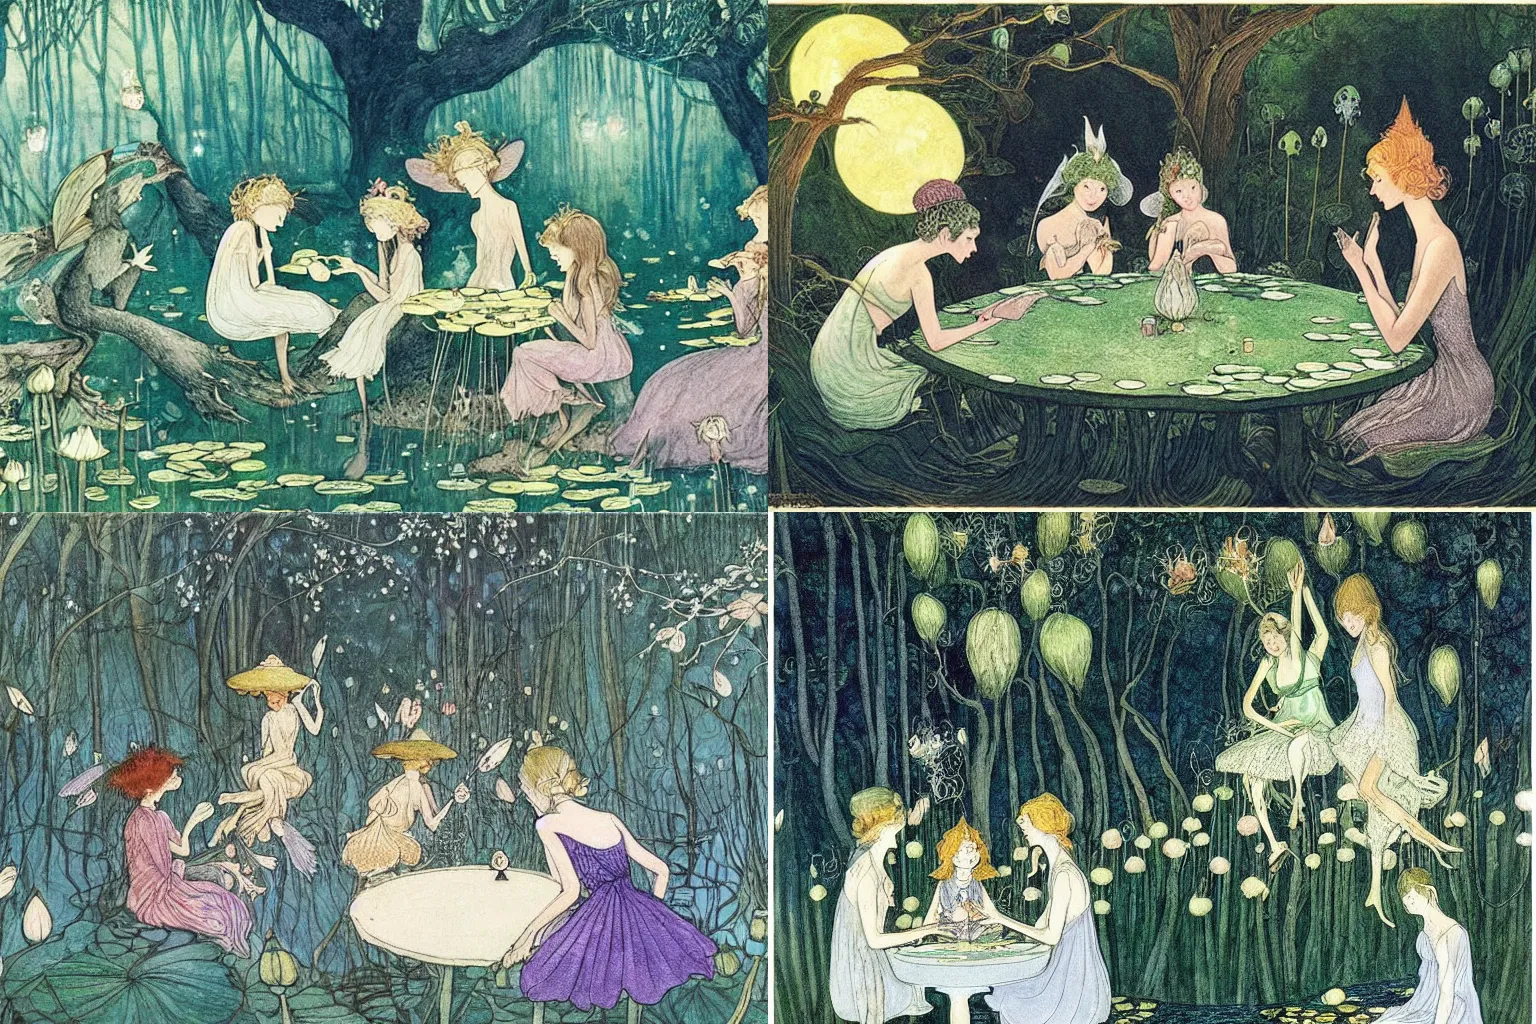 Prompt: a group of gracious fairies playing cards on a table in an atmospheric moonlit forest next to a beautiful pond filled with water lilies, artwork by ida rentoul outhwaite. the fairies have wings.